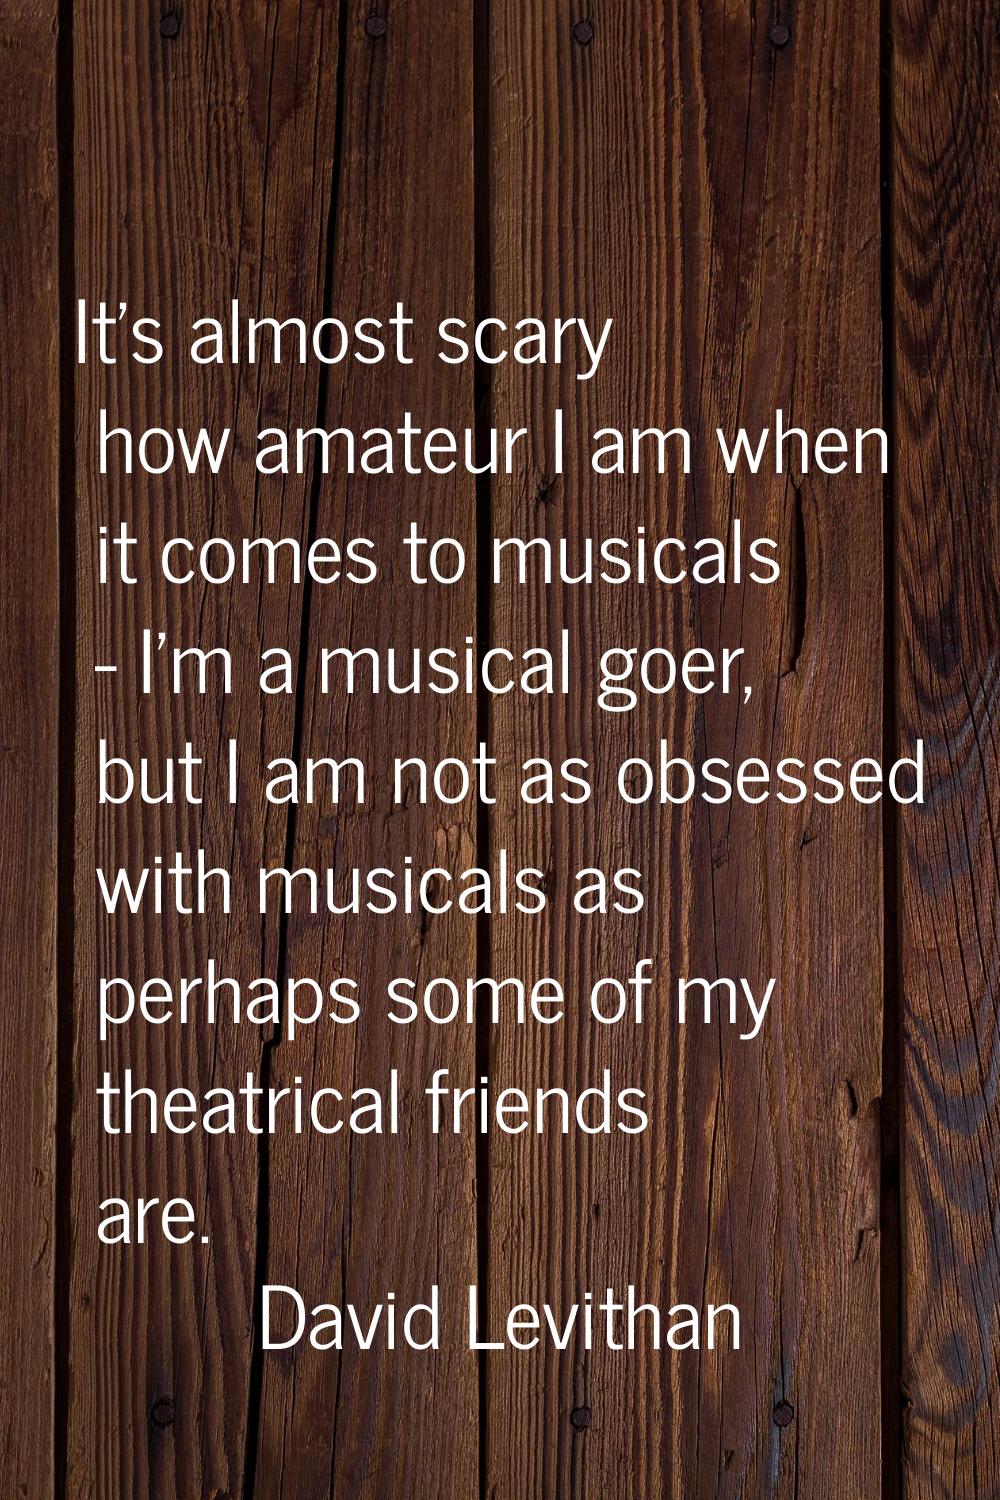 It's almost scary how amateur I am when it comes to musicals - I'm a musical goer, but I am not as 